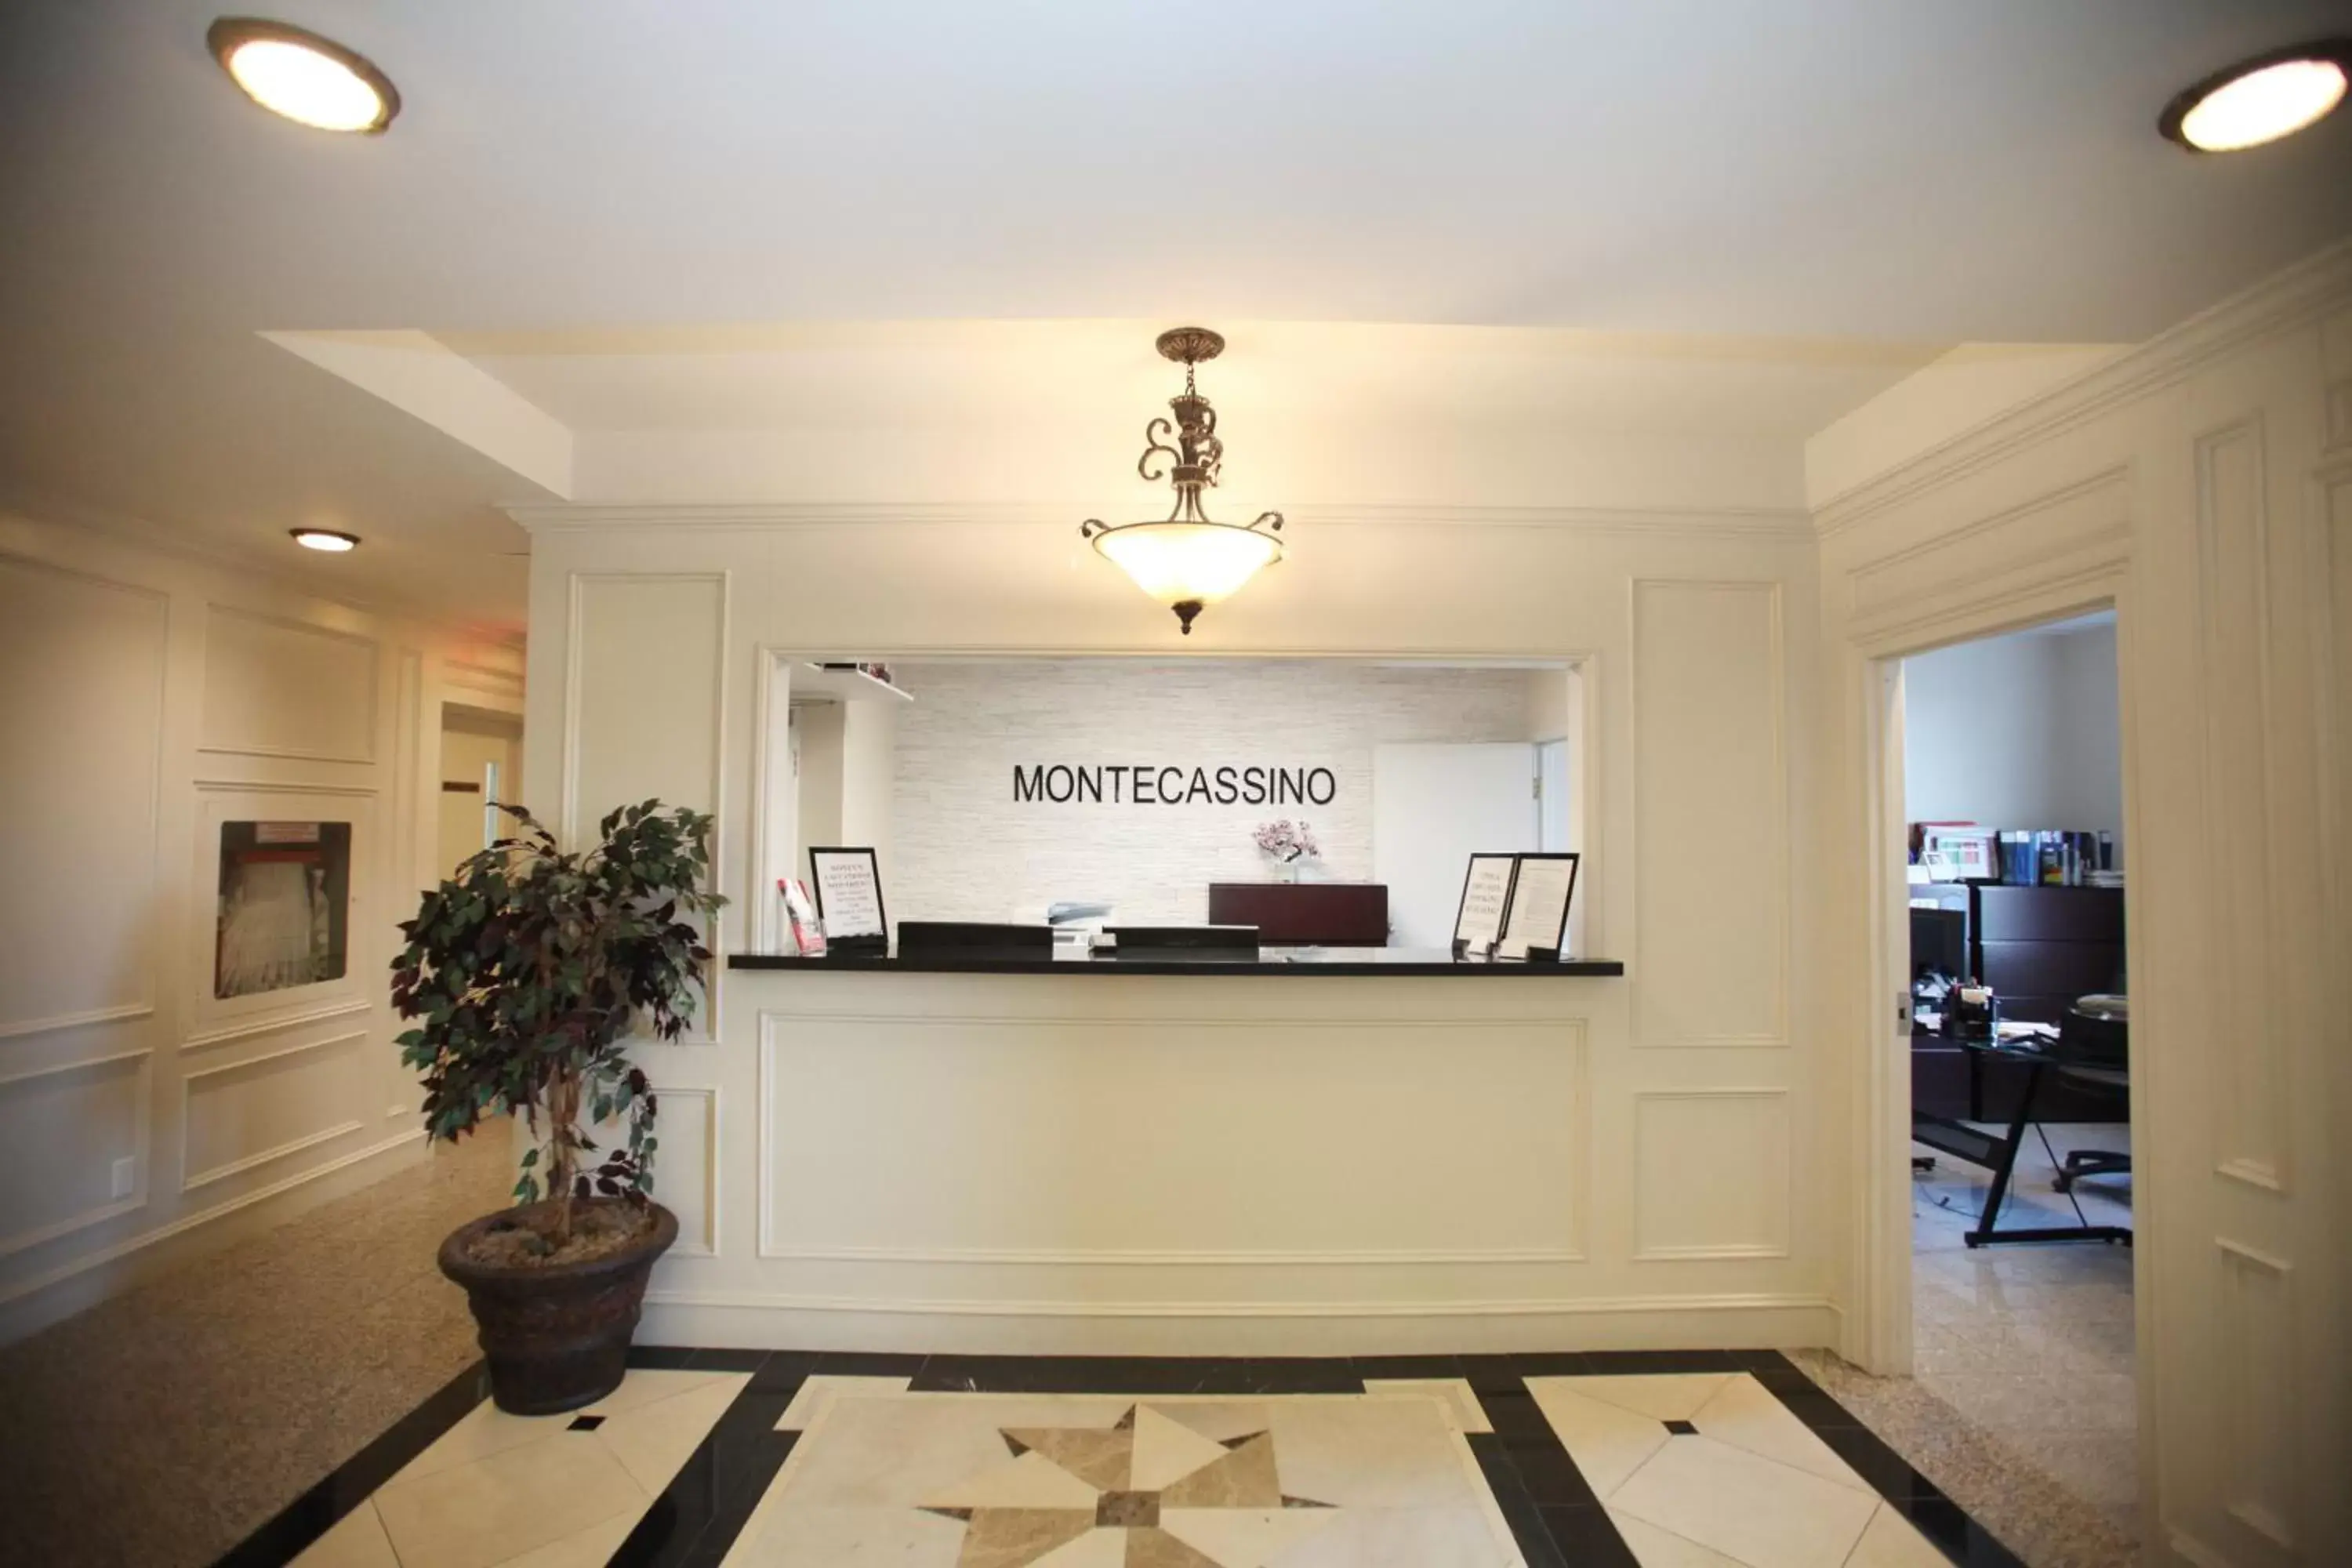 Lobby or reception in Montecassino Hotel & Suites